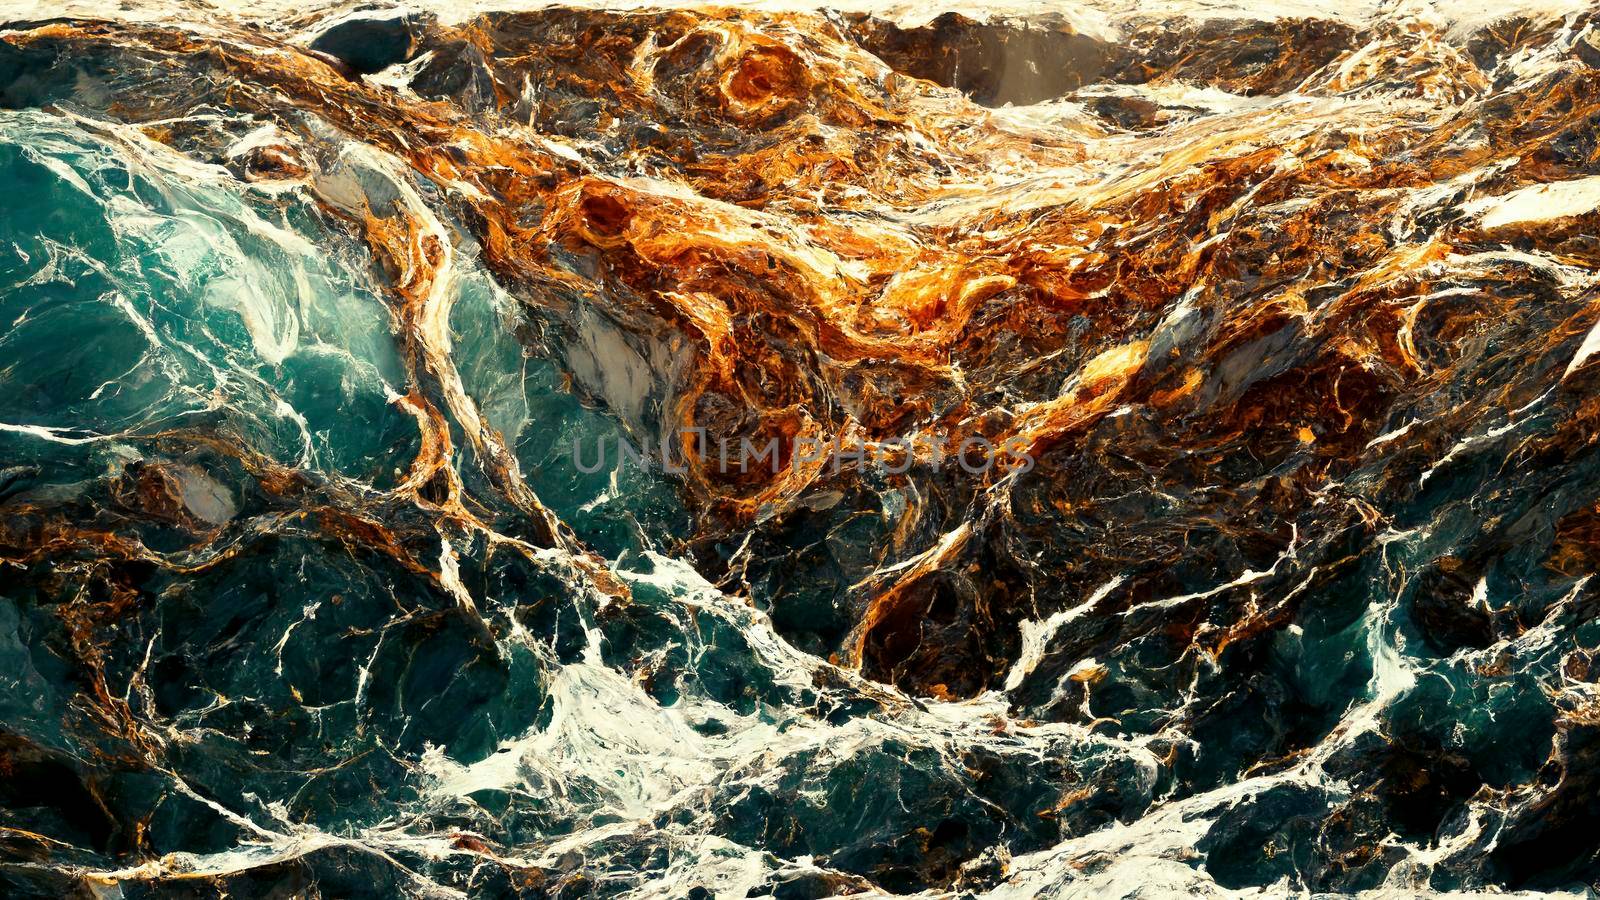 Luxurious Dark Agate Marble texture with Golden veins. Polished Quartz Stone Background Striped by nature with a unique patterning, dark concentric bands. by jbruiz78